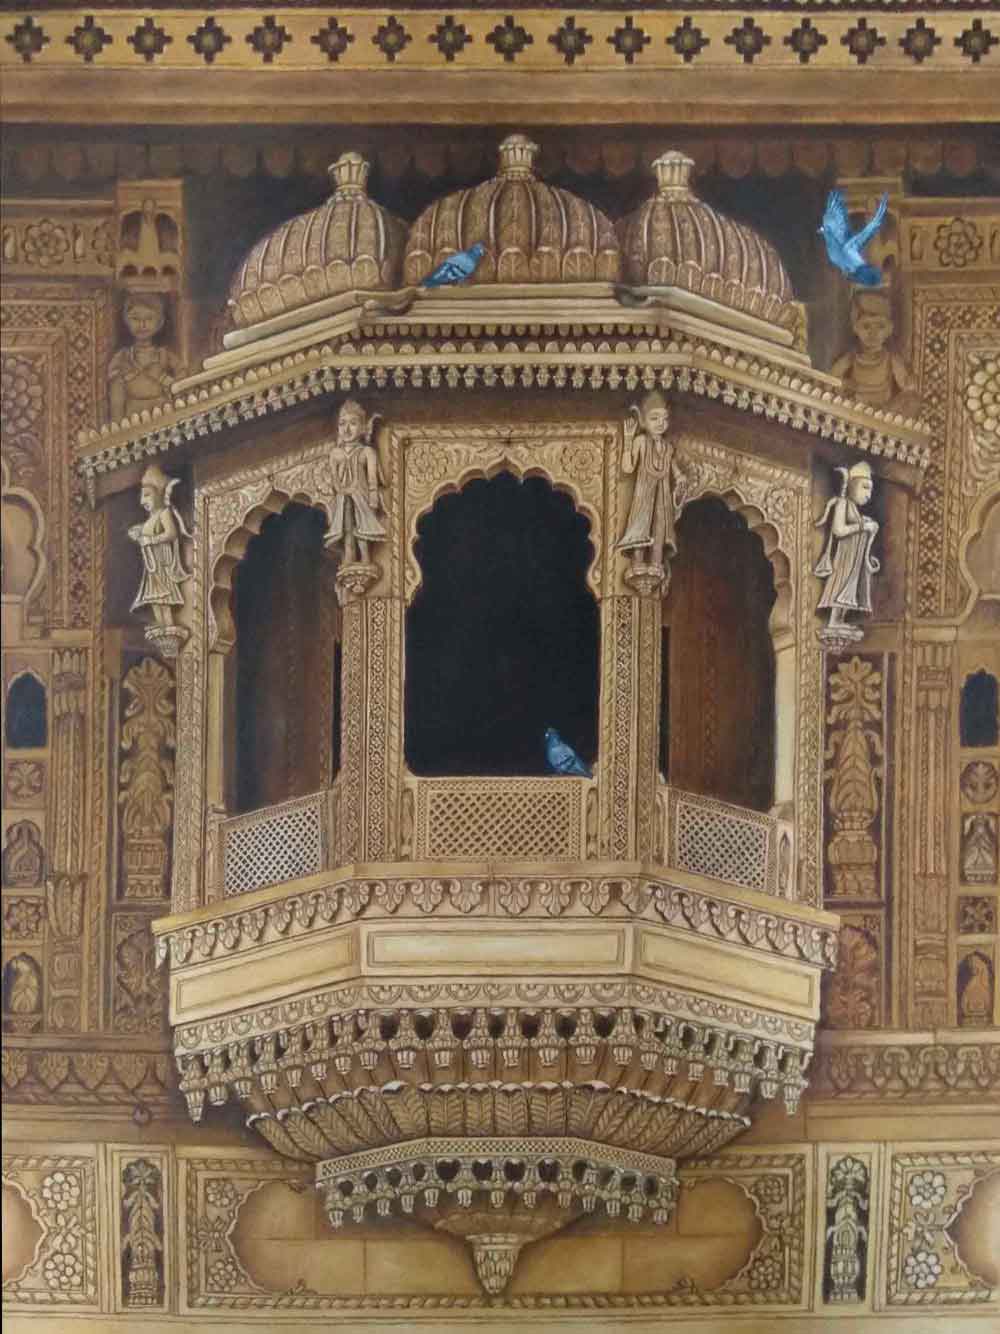 Realism Painting with Oil on Canvas "Jharokha" art by Anita Raj